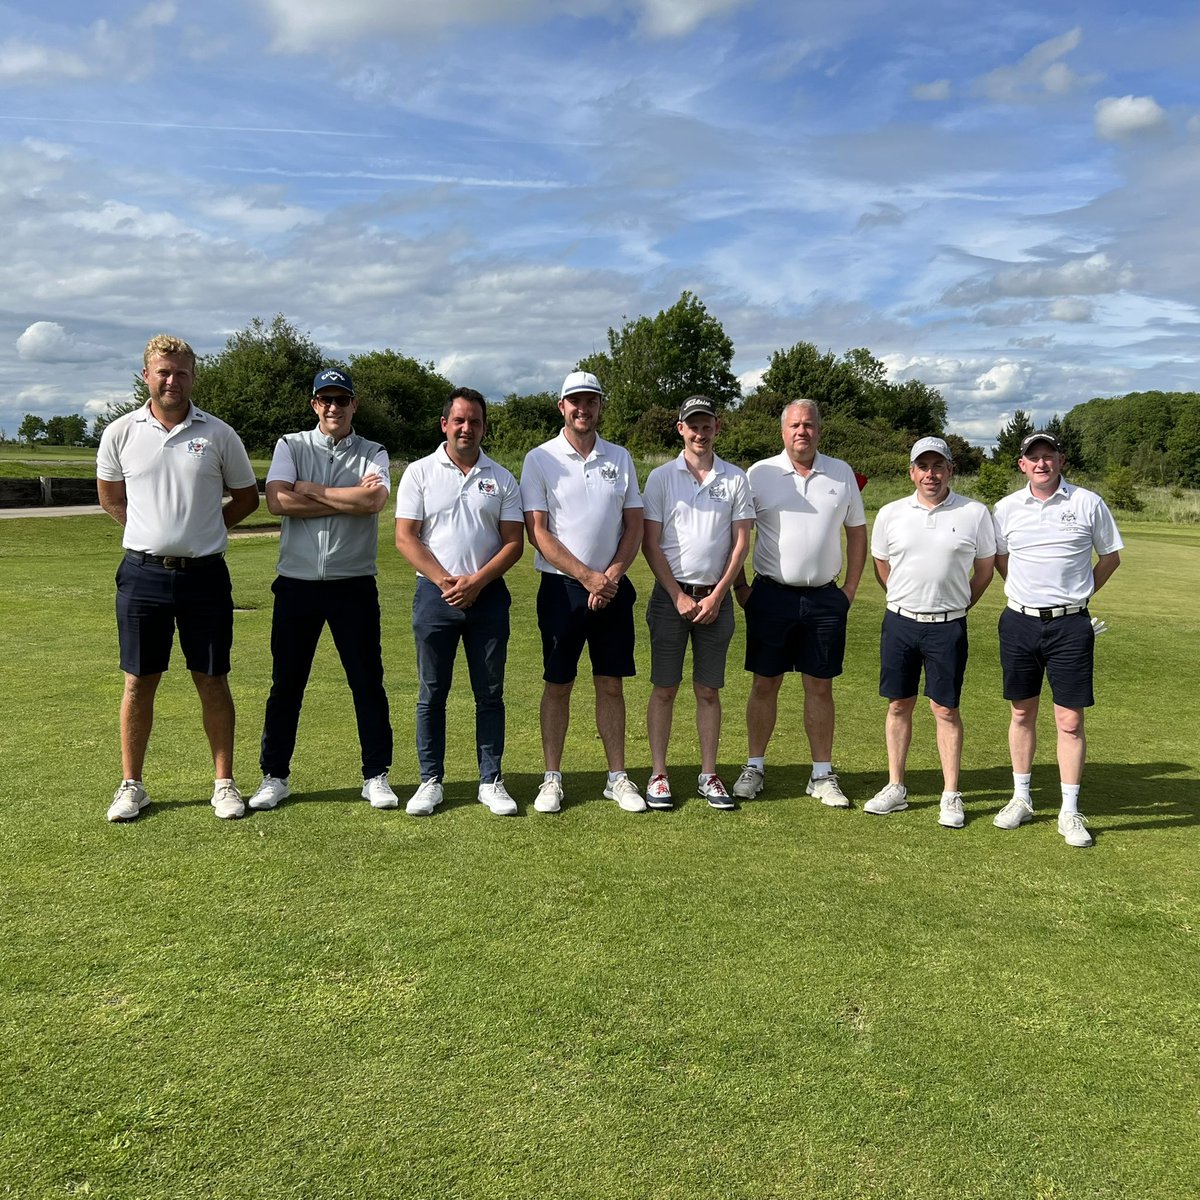 The sun shining on our 1st team Sunday evening at the Players Golf Club. Unfortunately the result was recorded as our first loss of the season. 4-1 with Dave Edwards and Matt Shaw as the only winning pair.